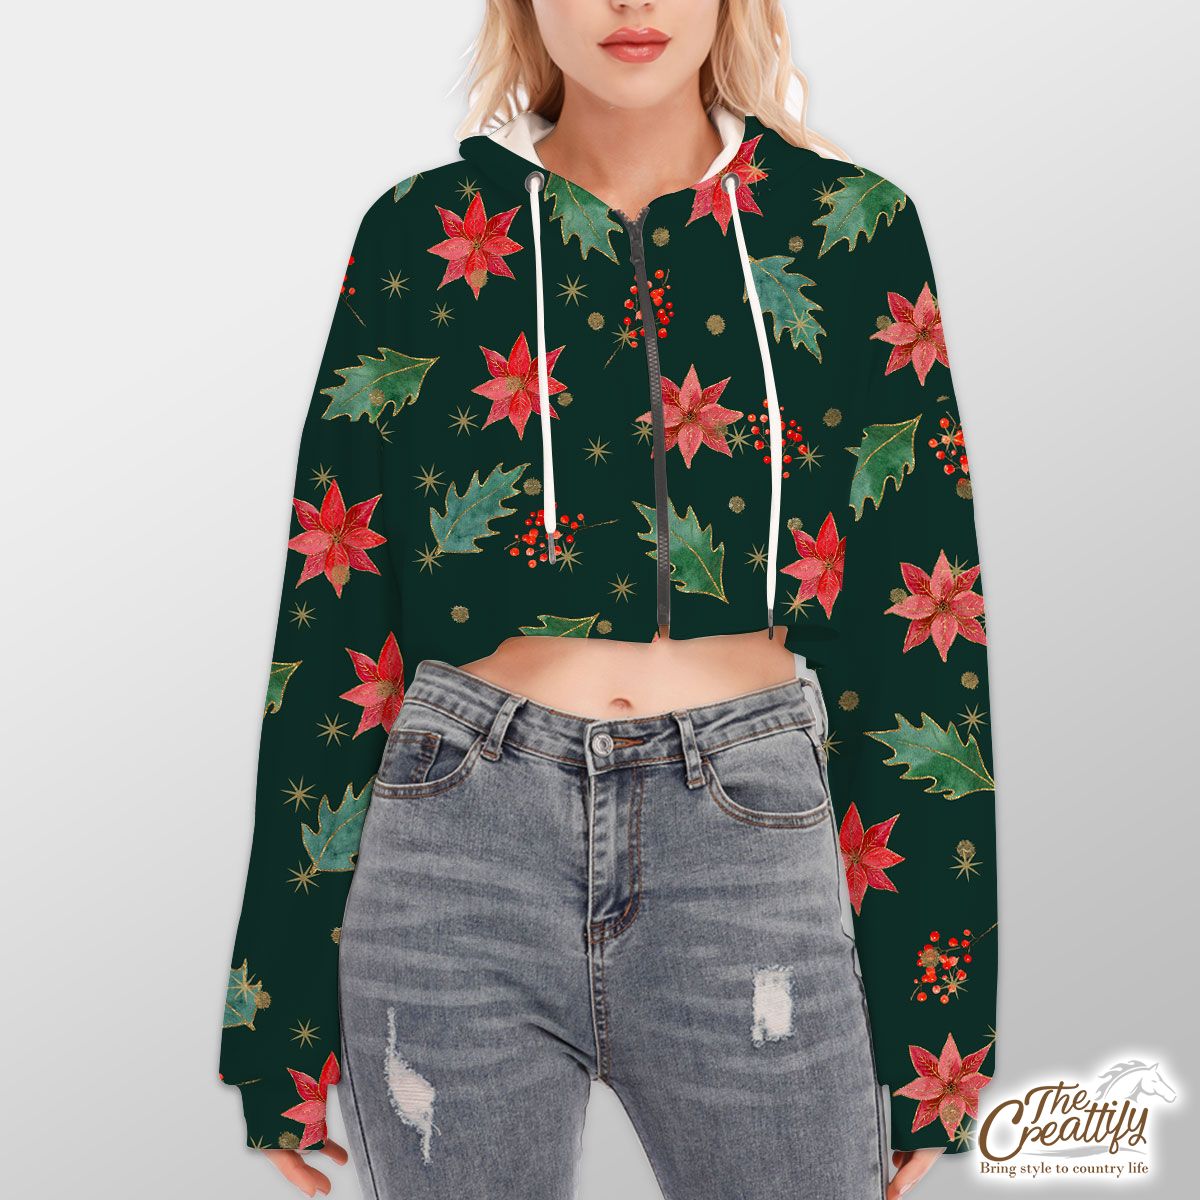 Poinsettias For Christmas And Holly Leaf Pattern Hoodie With Zipper Closure